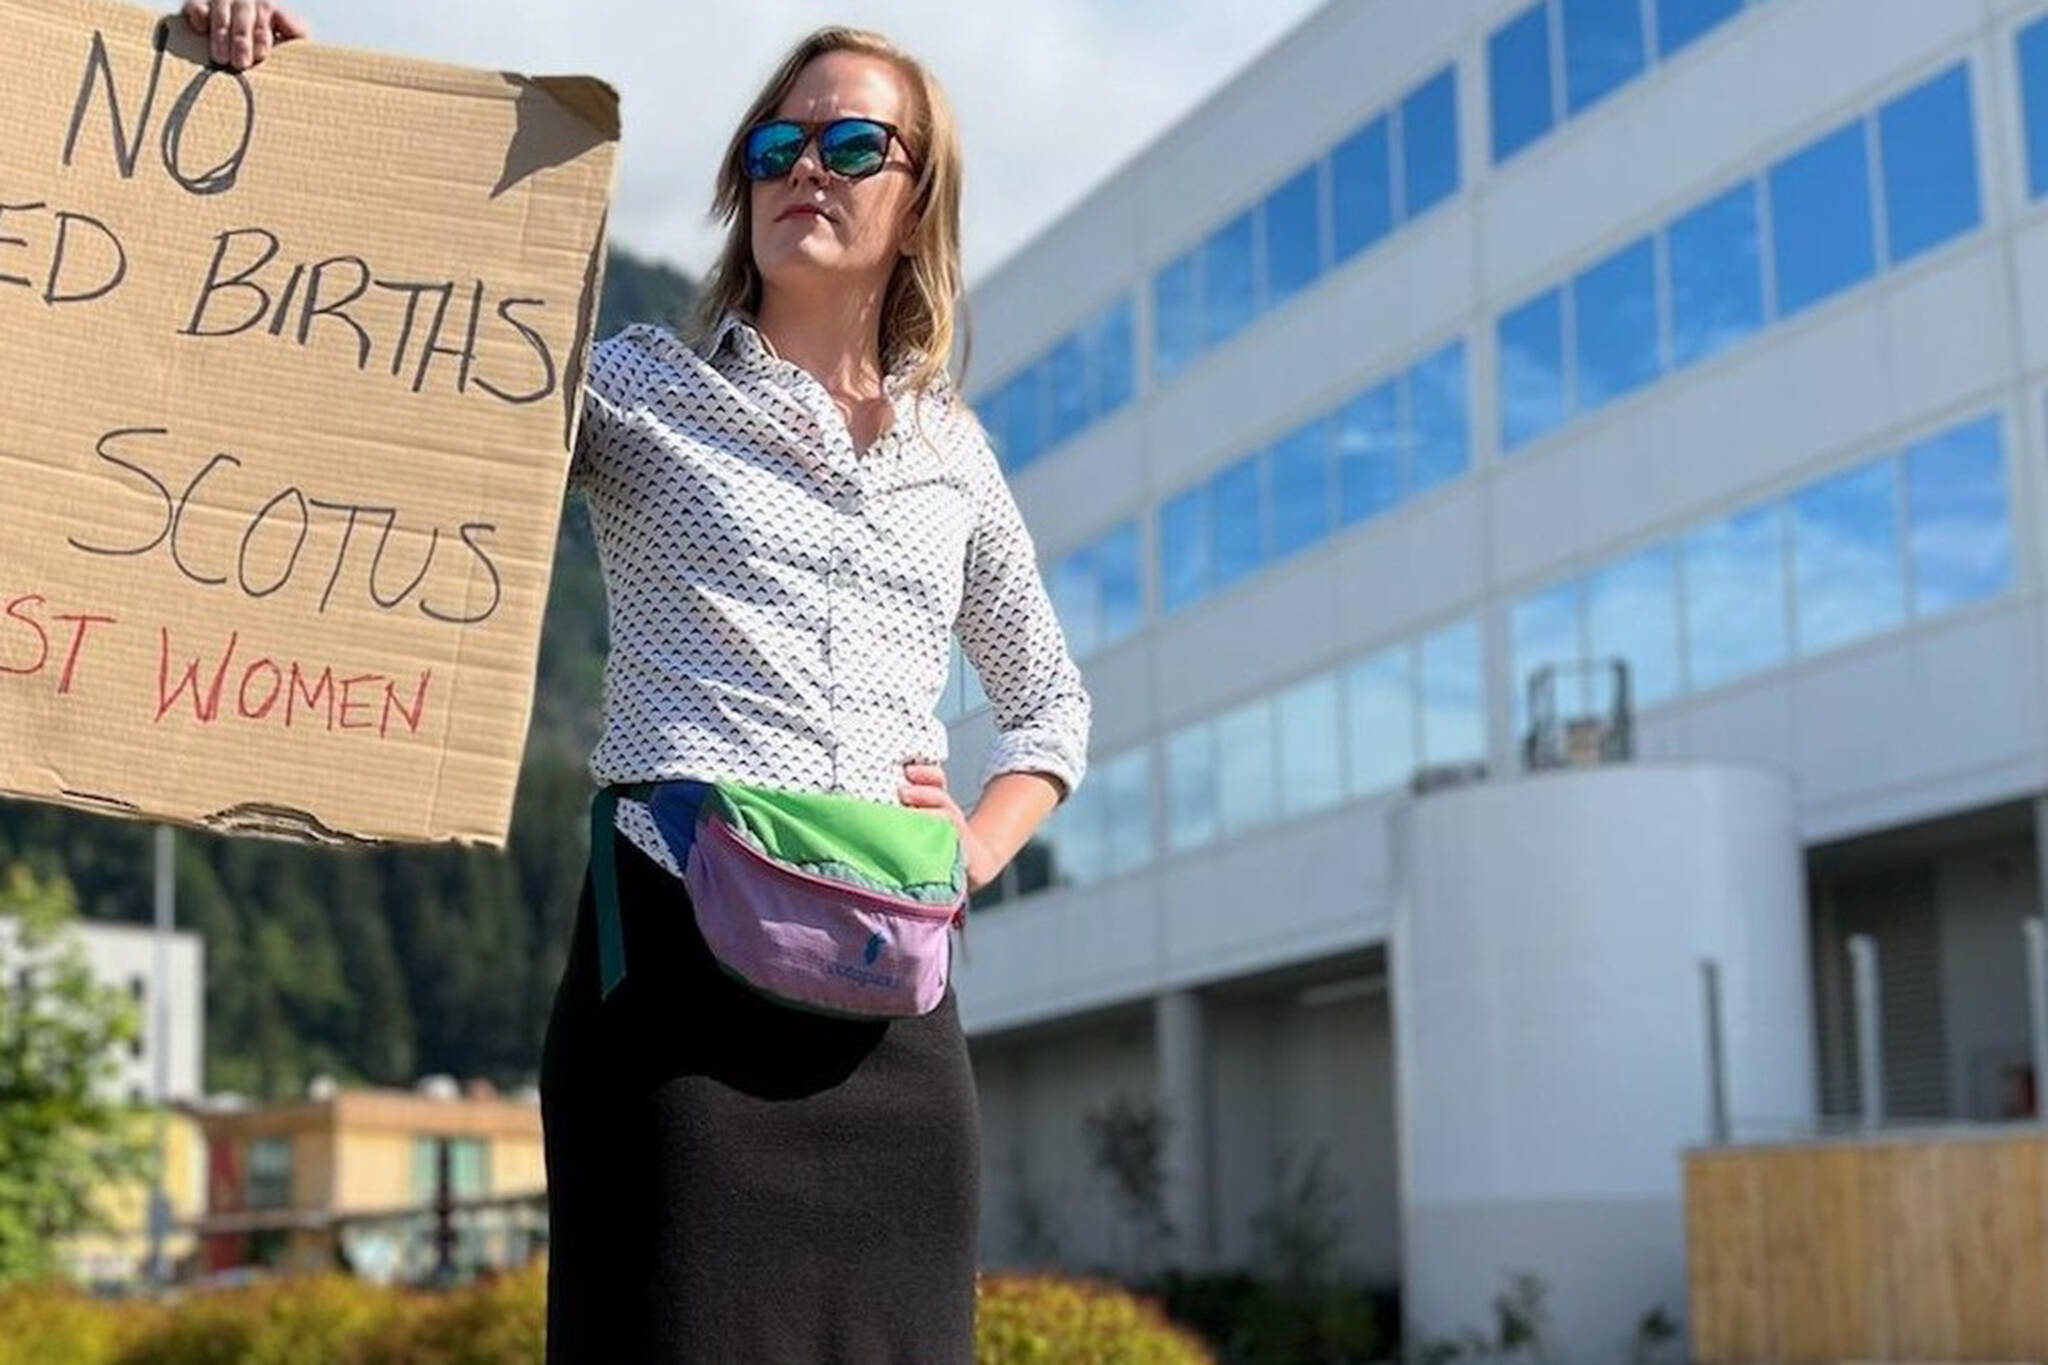 Emily Chapel holds up a sign containing an expletive in protest of the U.S. Supreme Court's decision to overturn Roe v. Wade. The decision had protected rights to abortion access for nearly 50 years. Following the new decision, states can decide to ban abortion. (Jonson Kuhn / Juneau Empire)